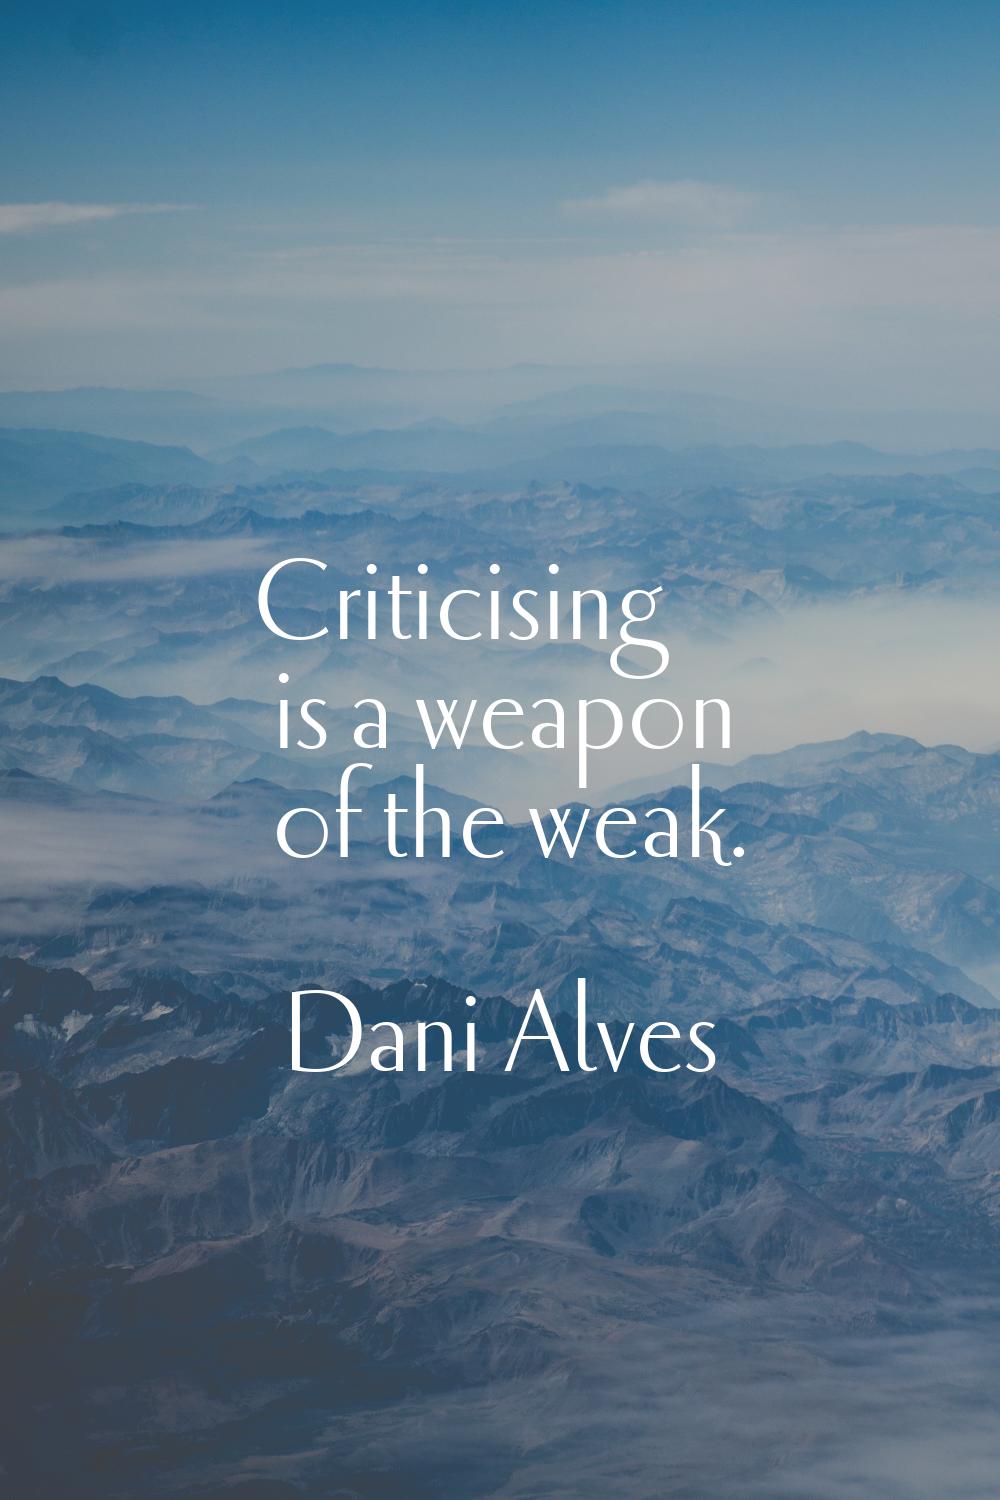 Criticising is a weapon of the weak.